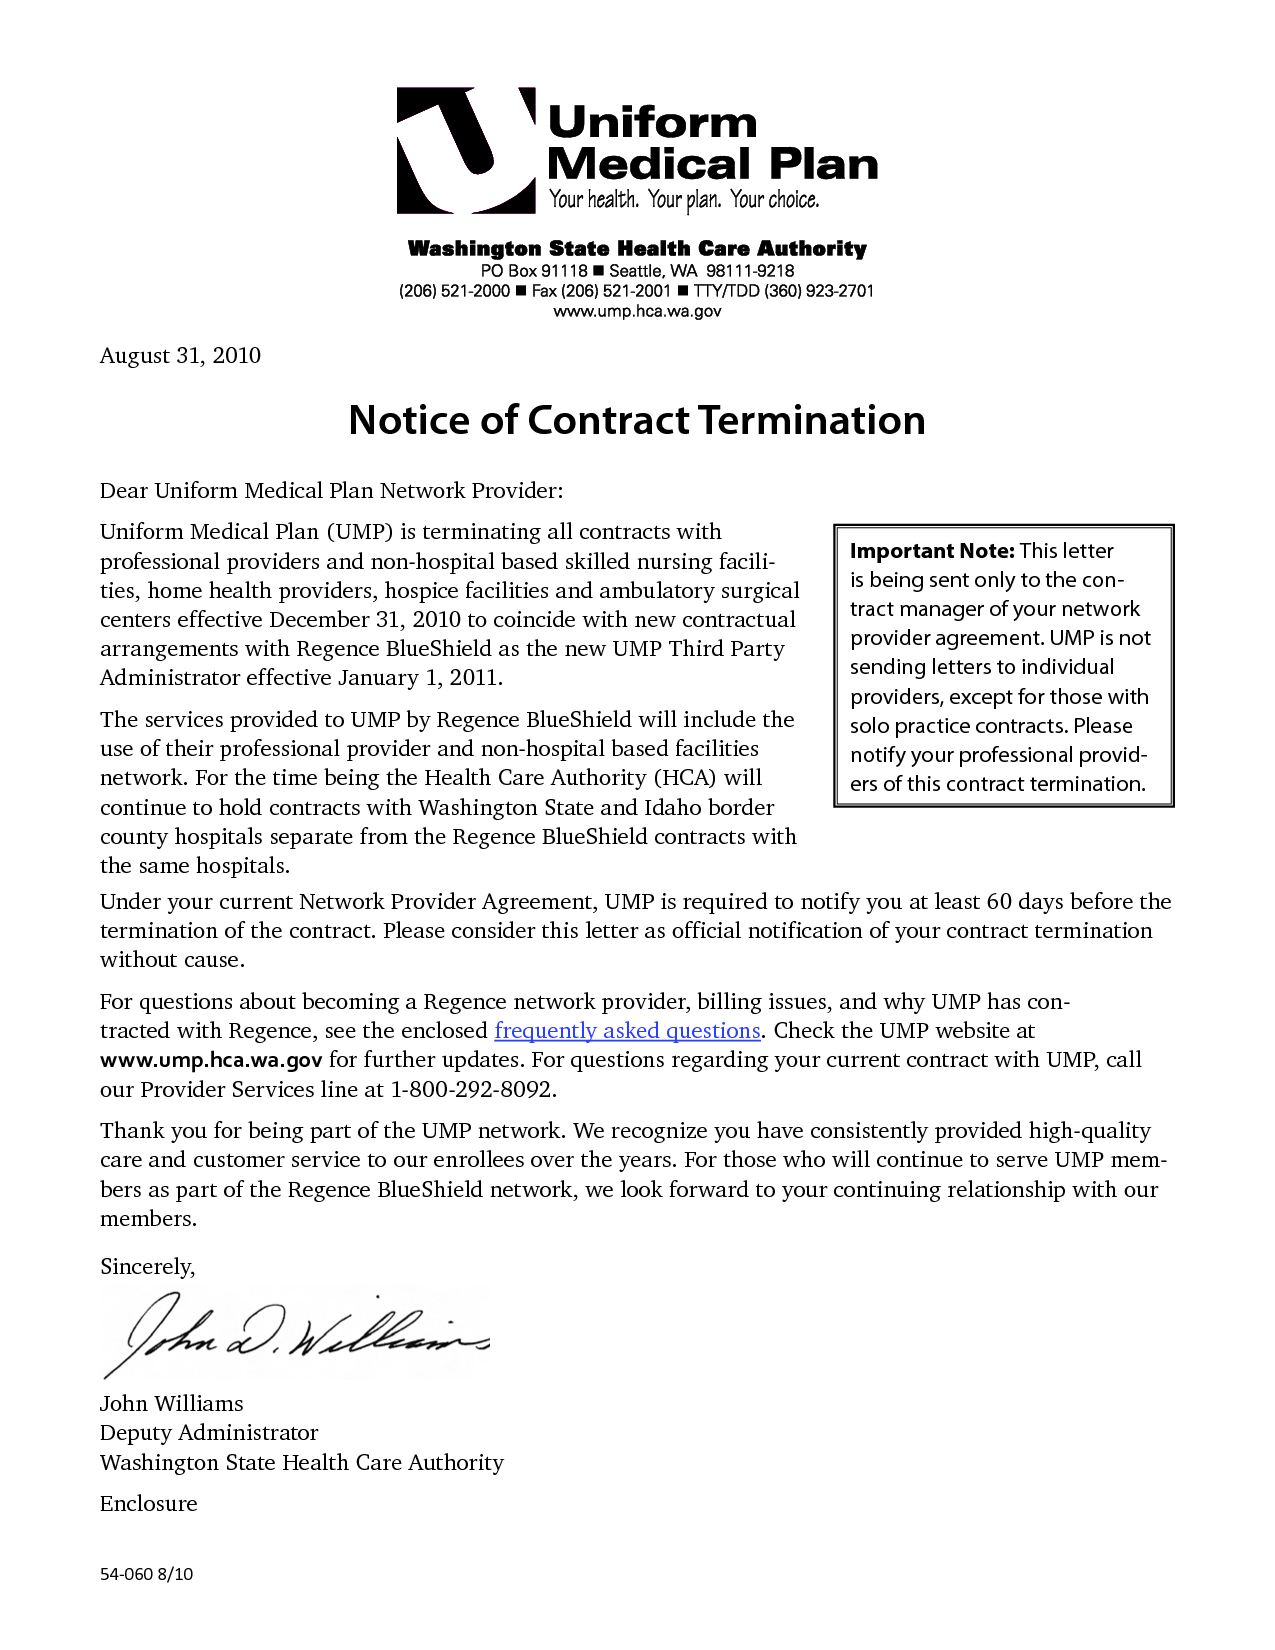 Termination Of Contract Agreement Letter Template - 20 Luxury Termination Service Agreement Letter Sample